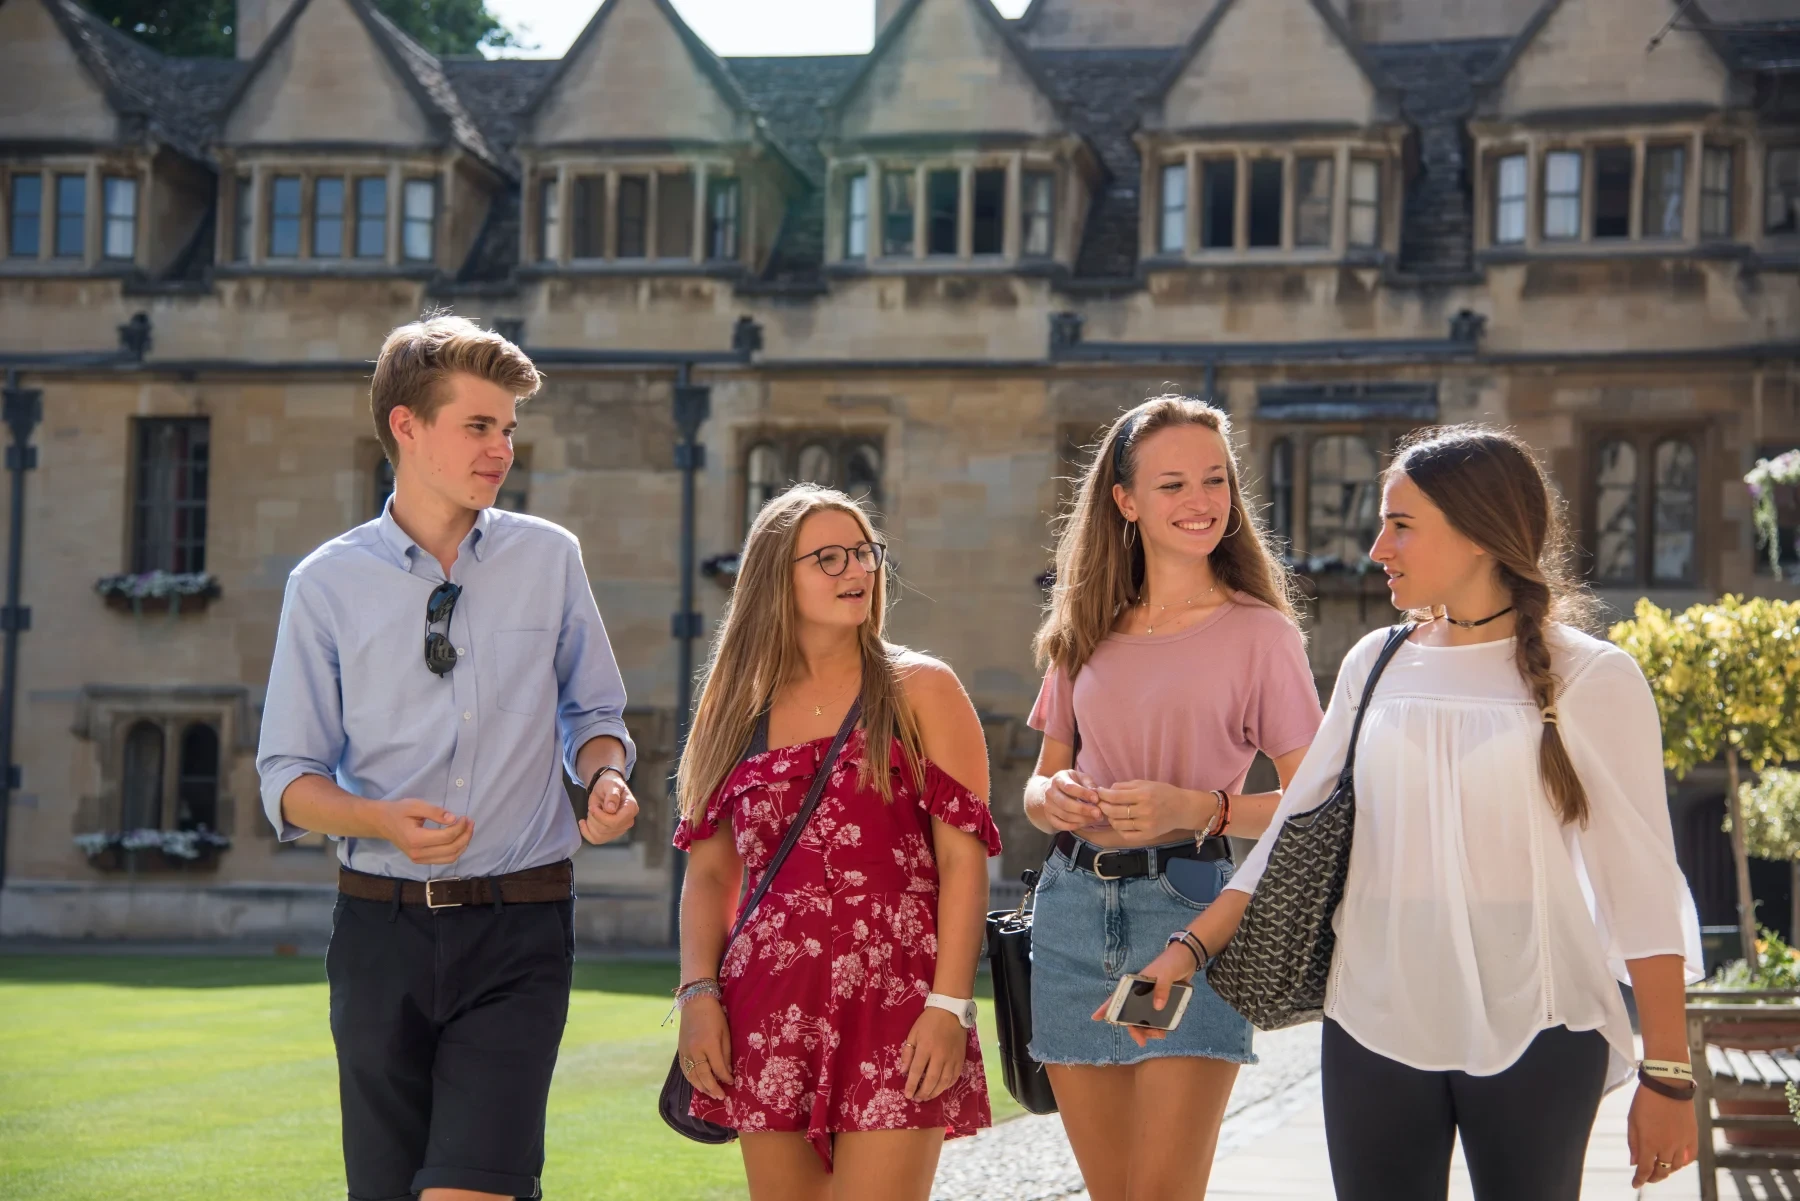 Four students visiting Oxford college